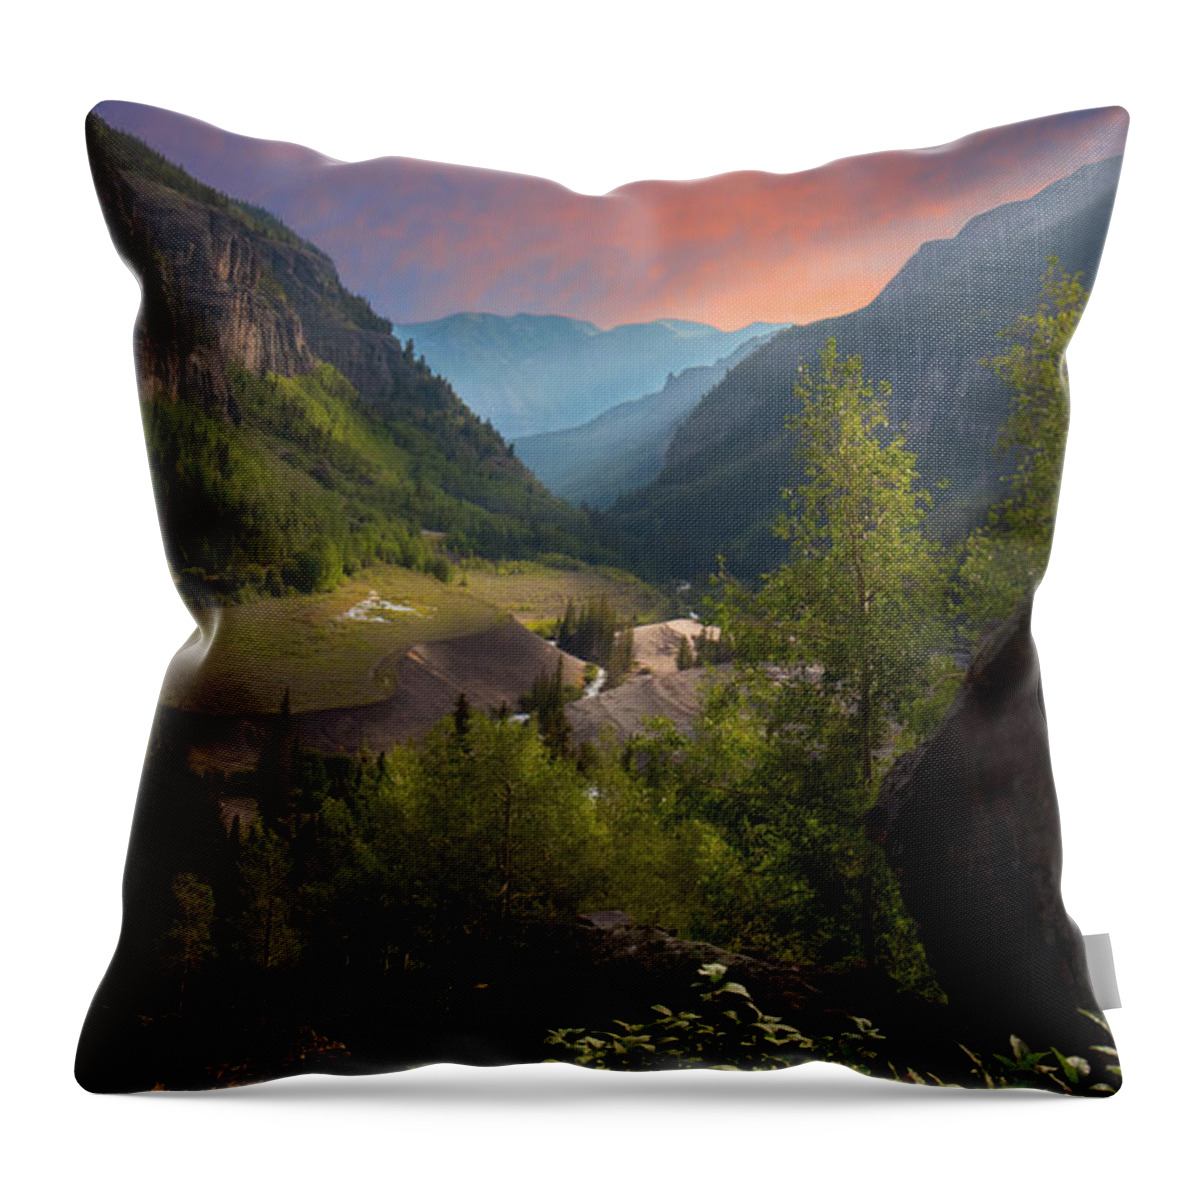 Colorado Throw Pillow featuring the photograph Mountain Time by Linda Unger